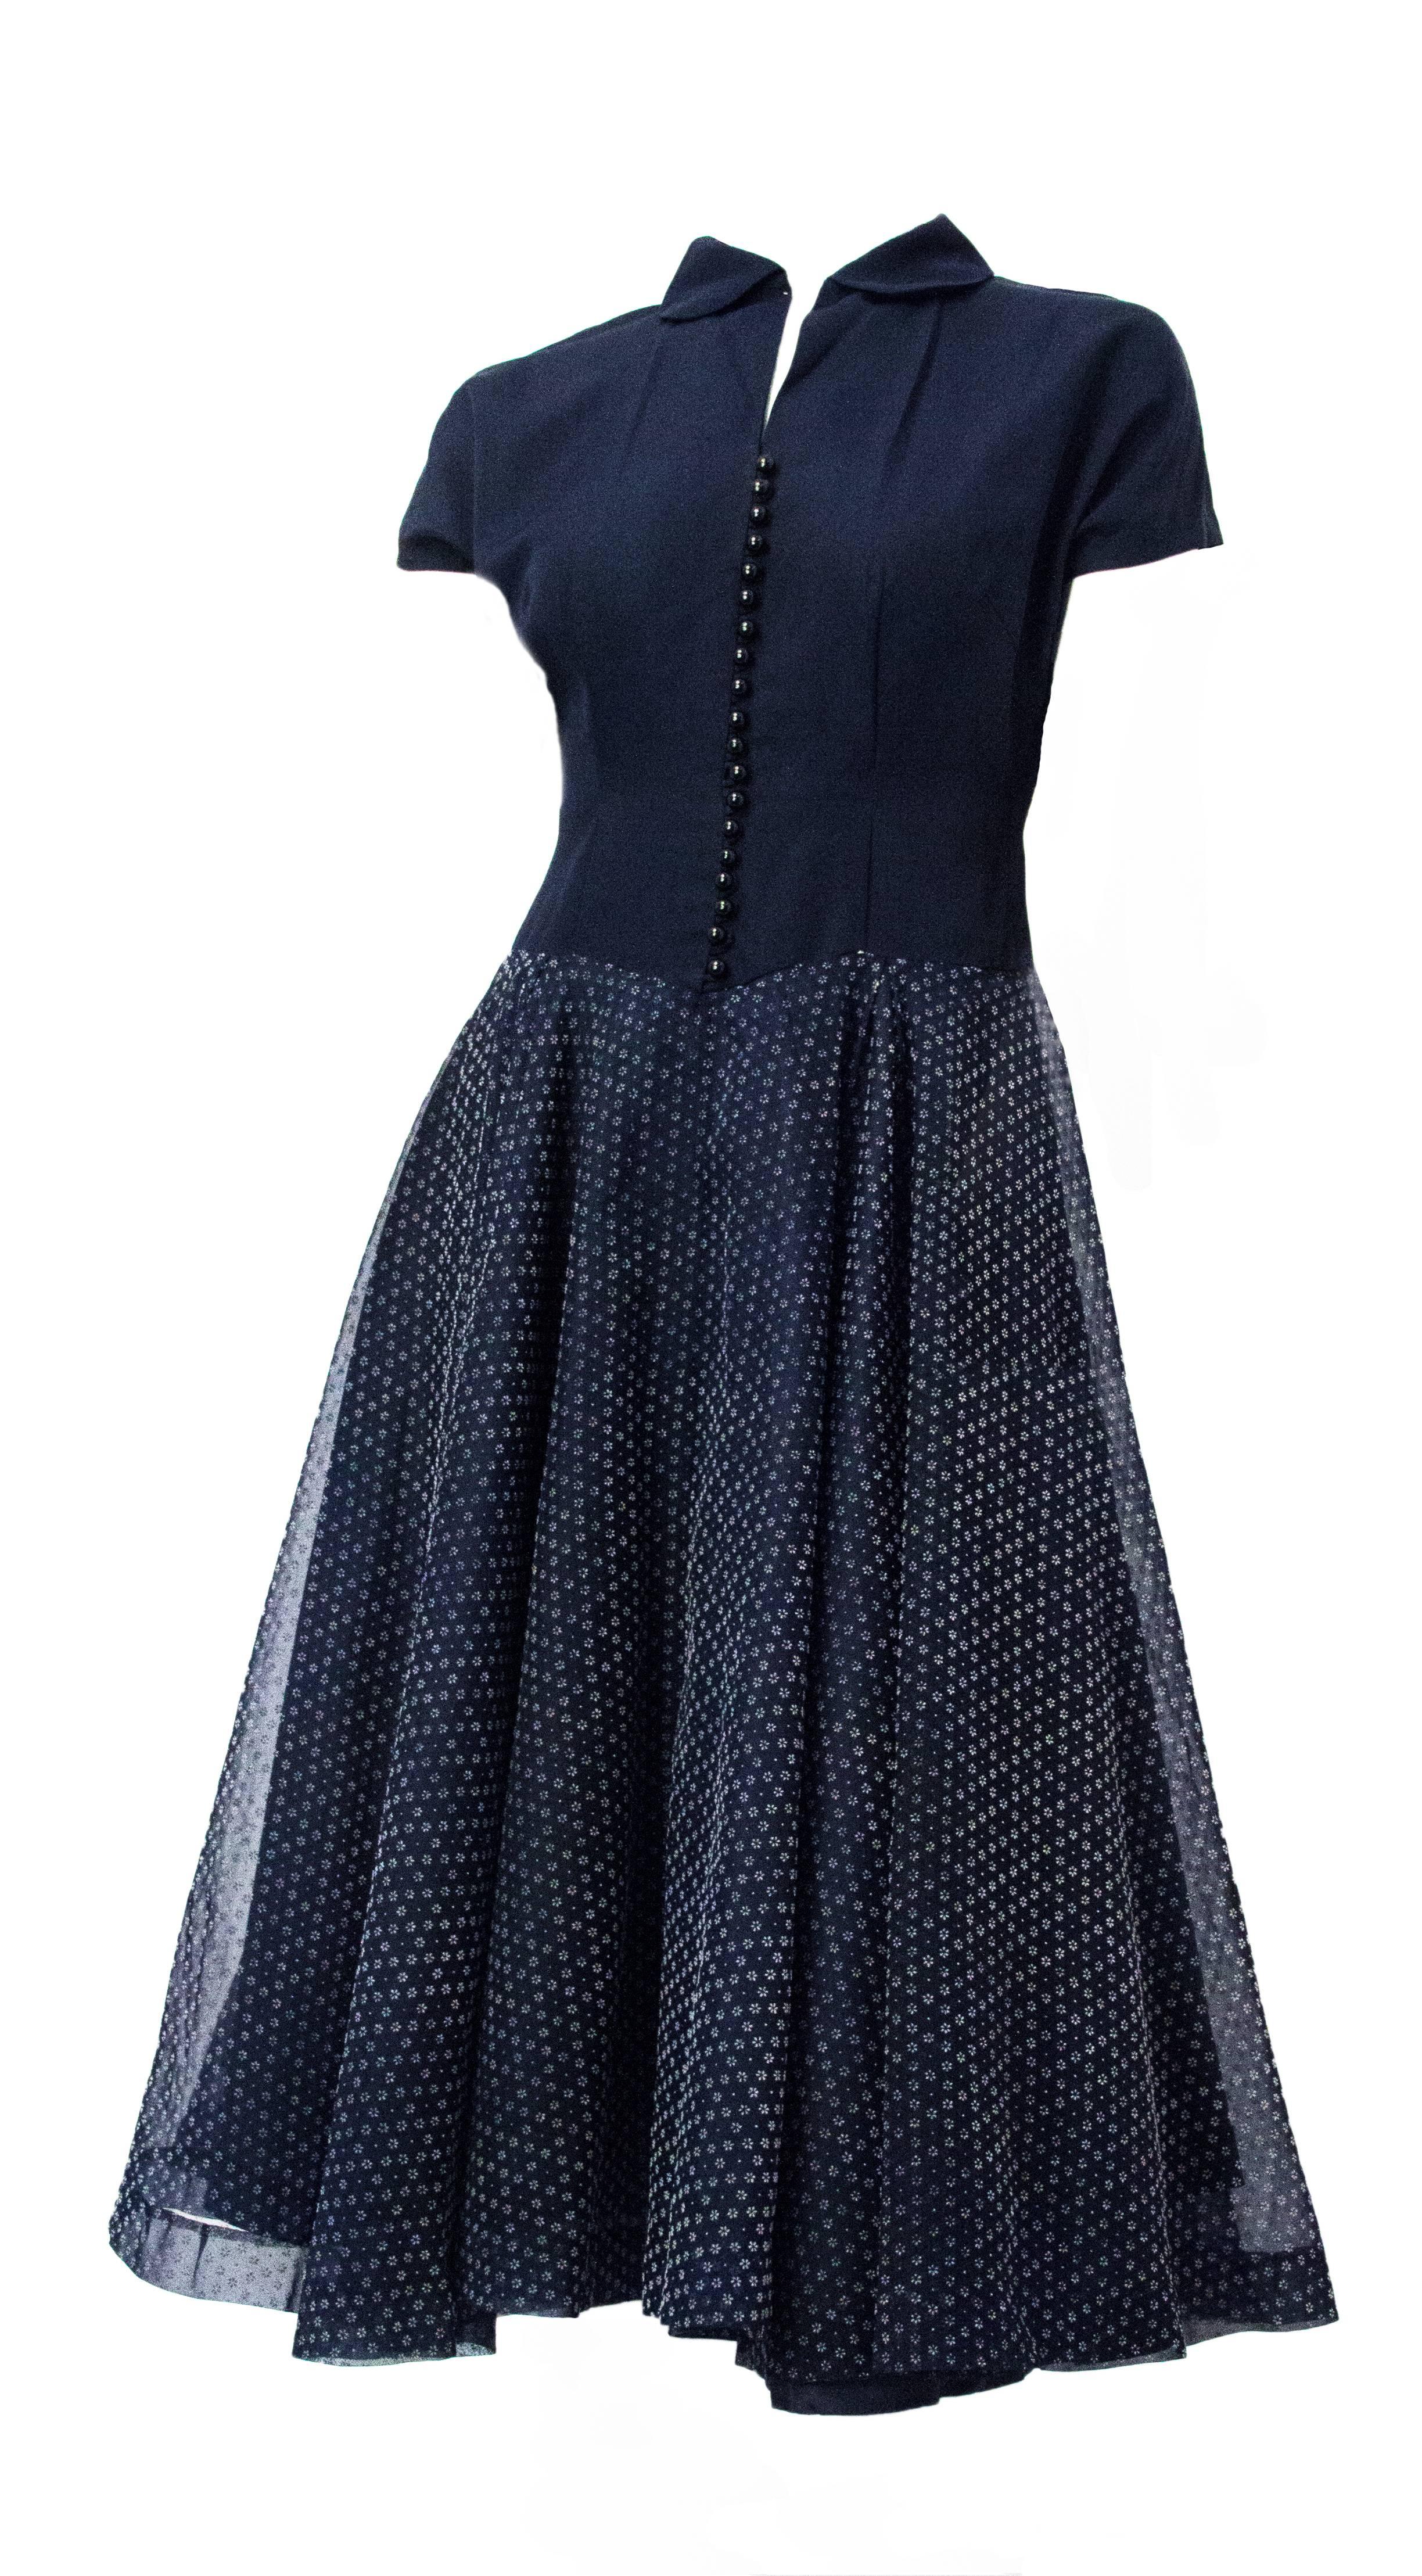 1950s navy day dress. Front button closure, as well as metal side zipper. Floral burnout organza skirt. Two box pleats on both front and back of skirt. Acetate lining. 

